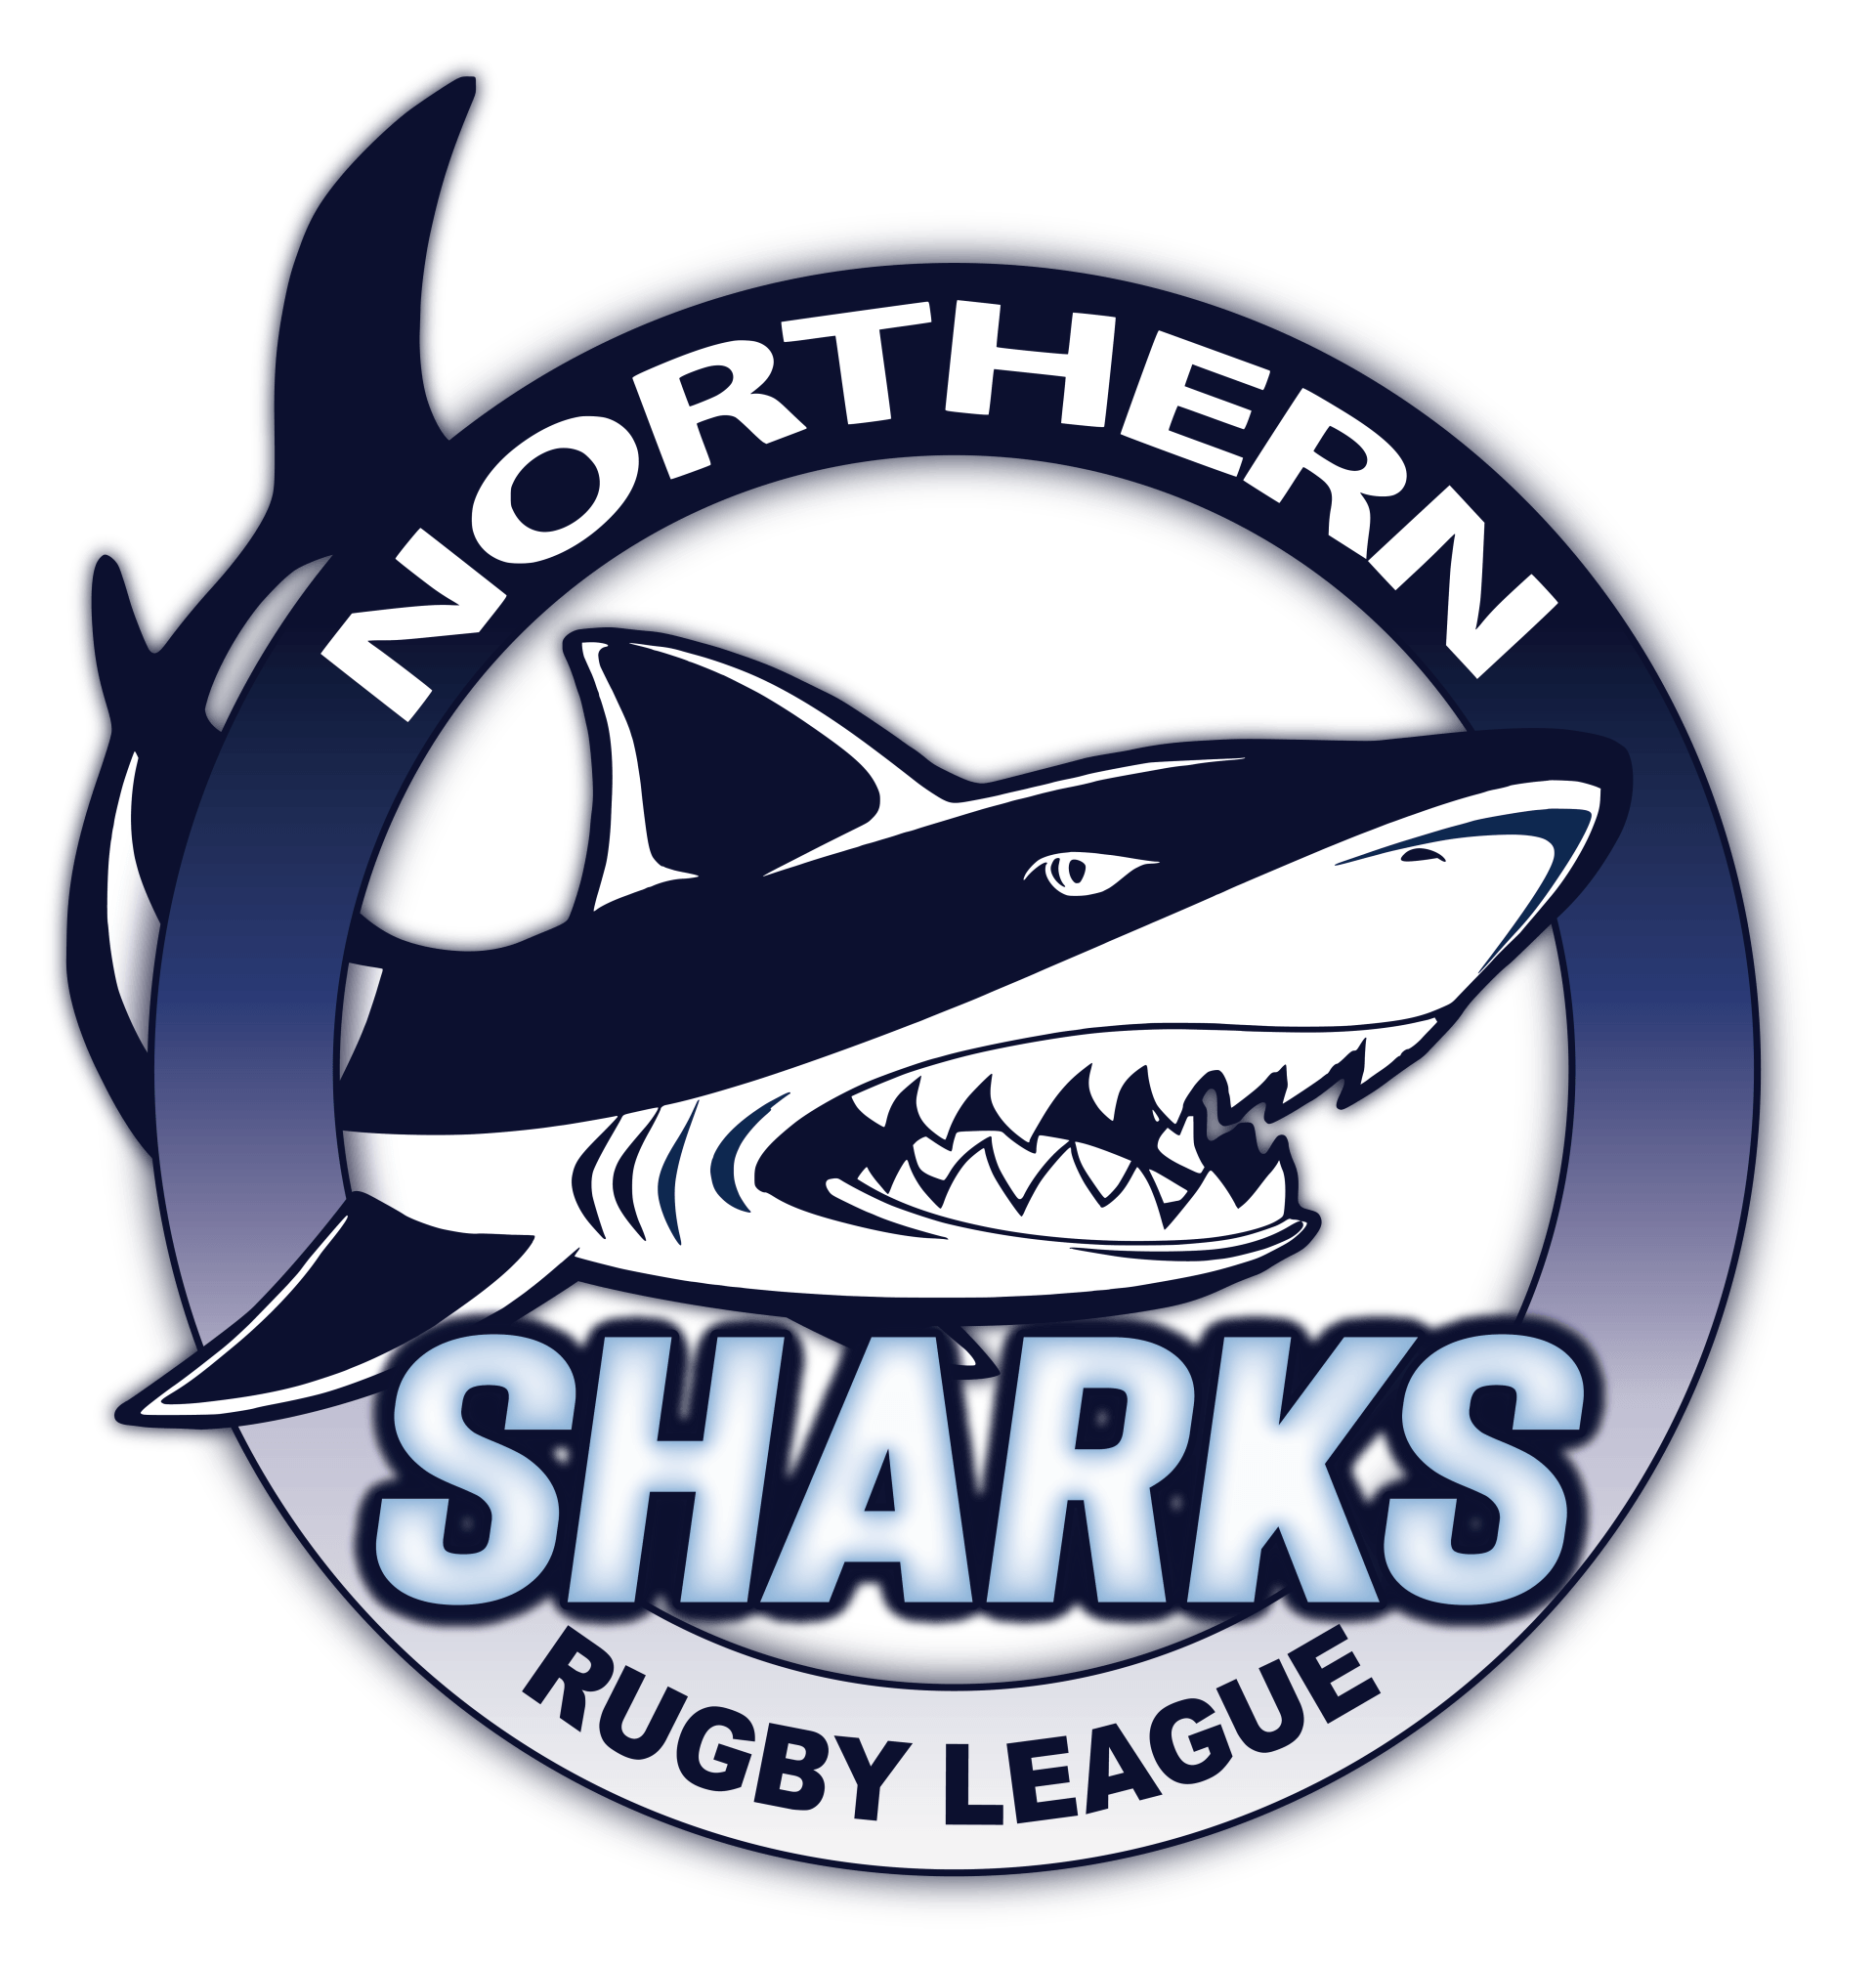 Northern Sharks Rugby League